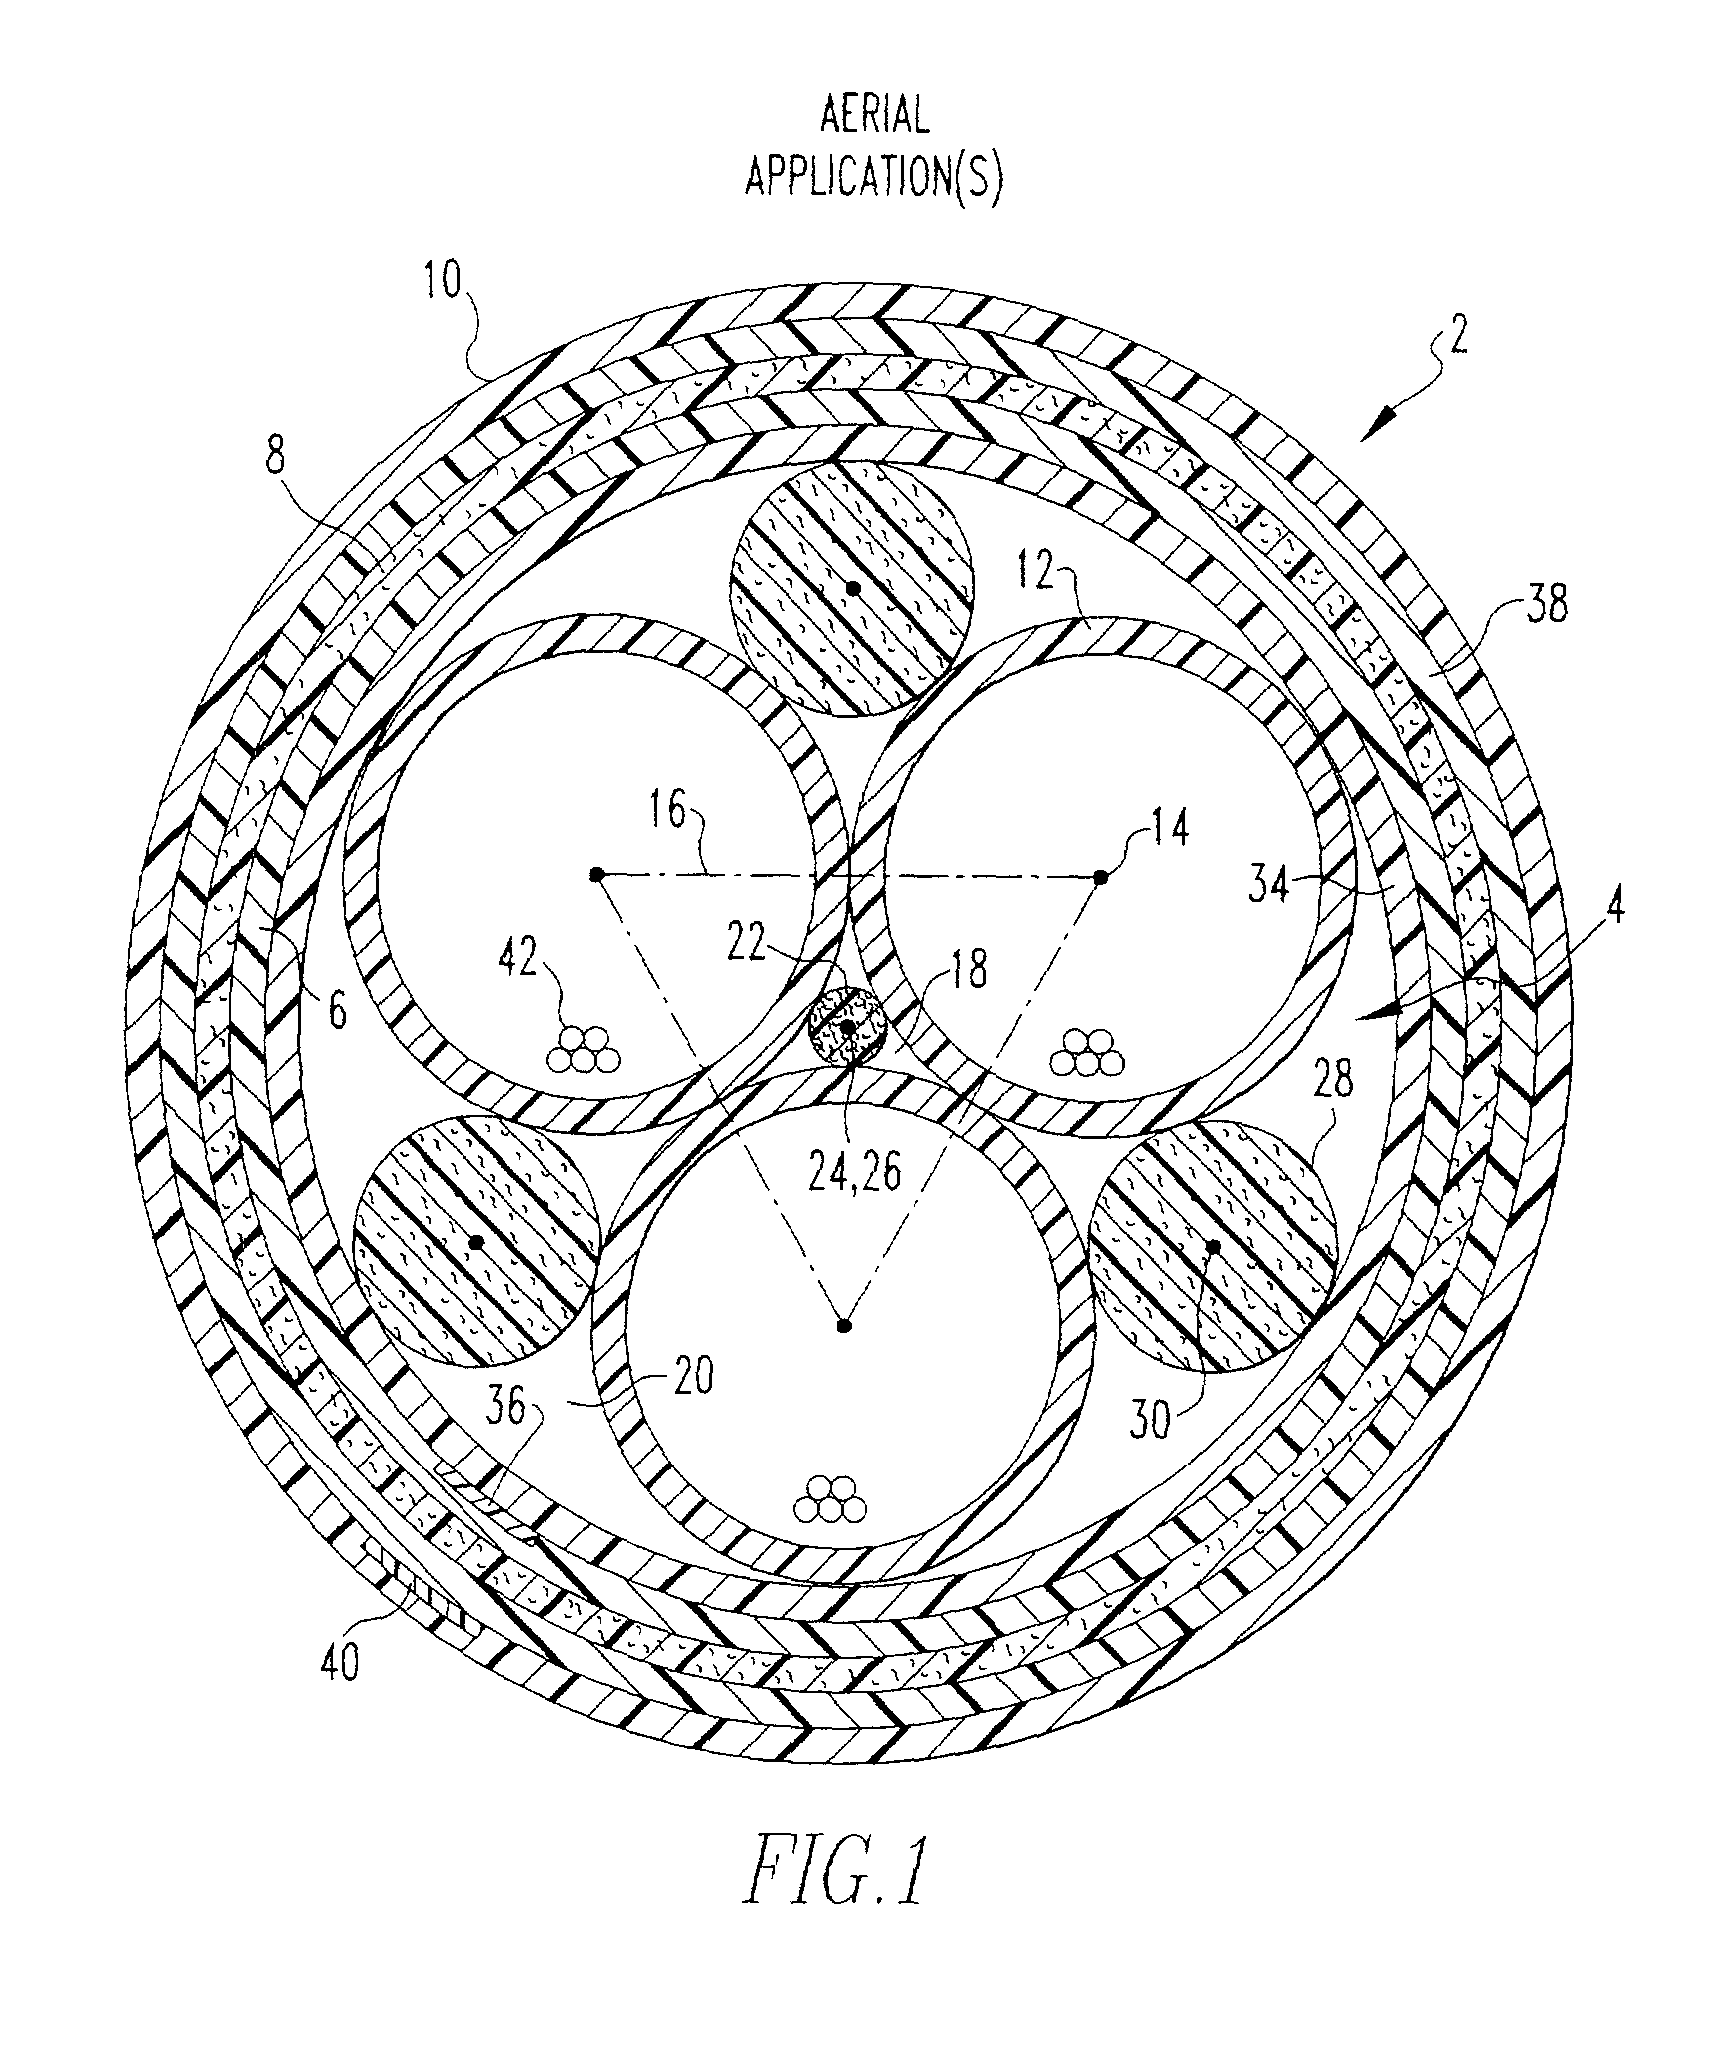 Optical fiber cable assembly with interstitial support members